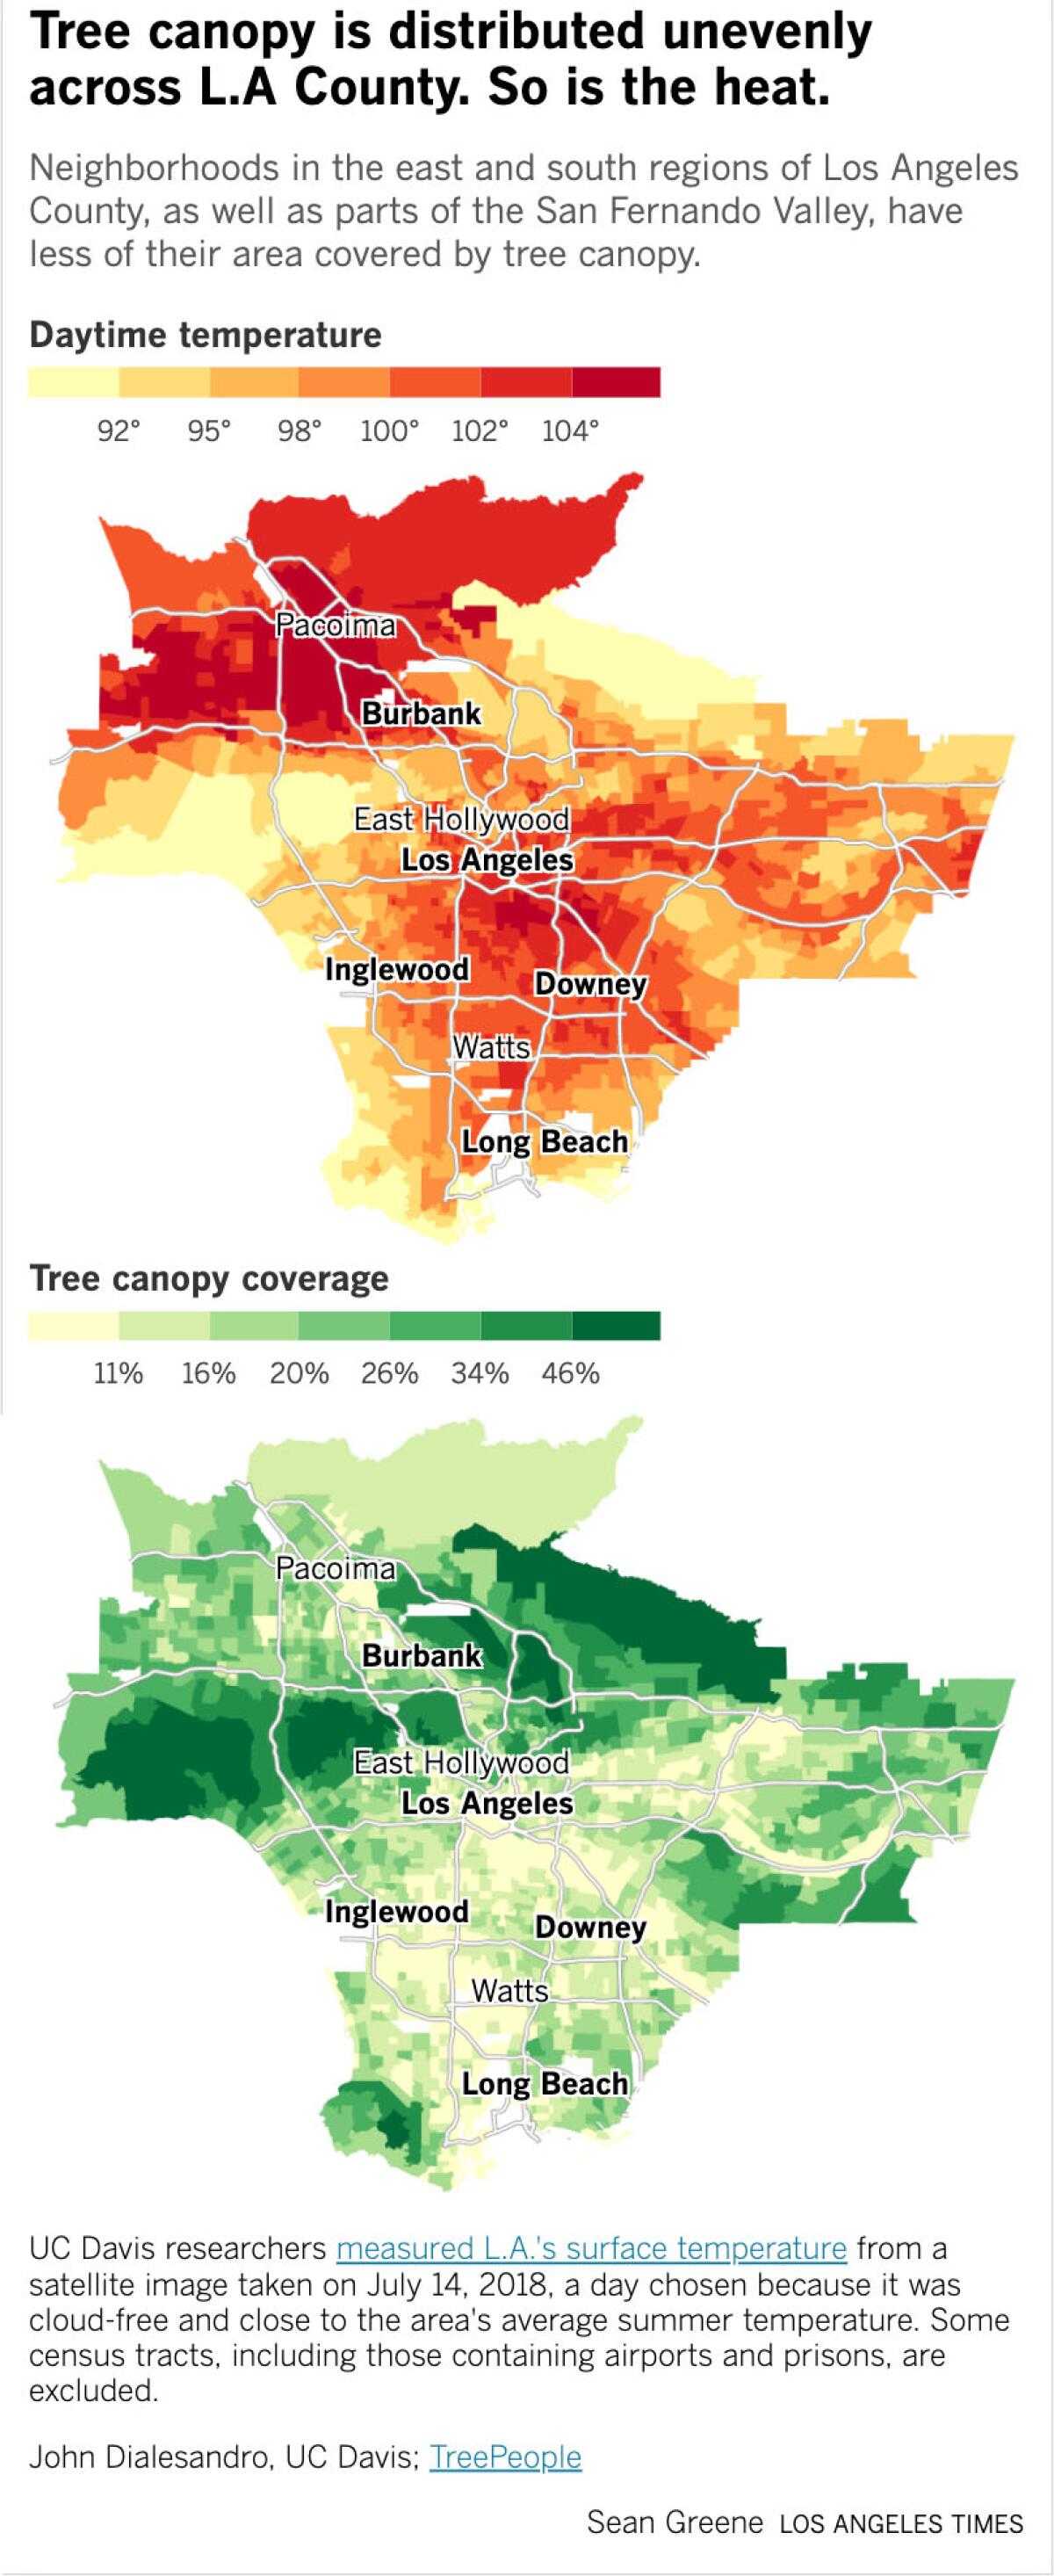 Maps showing the differences in daytime temperature and tree canopy coverage in L.A. County.